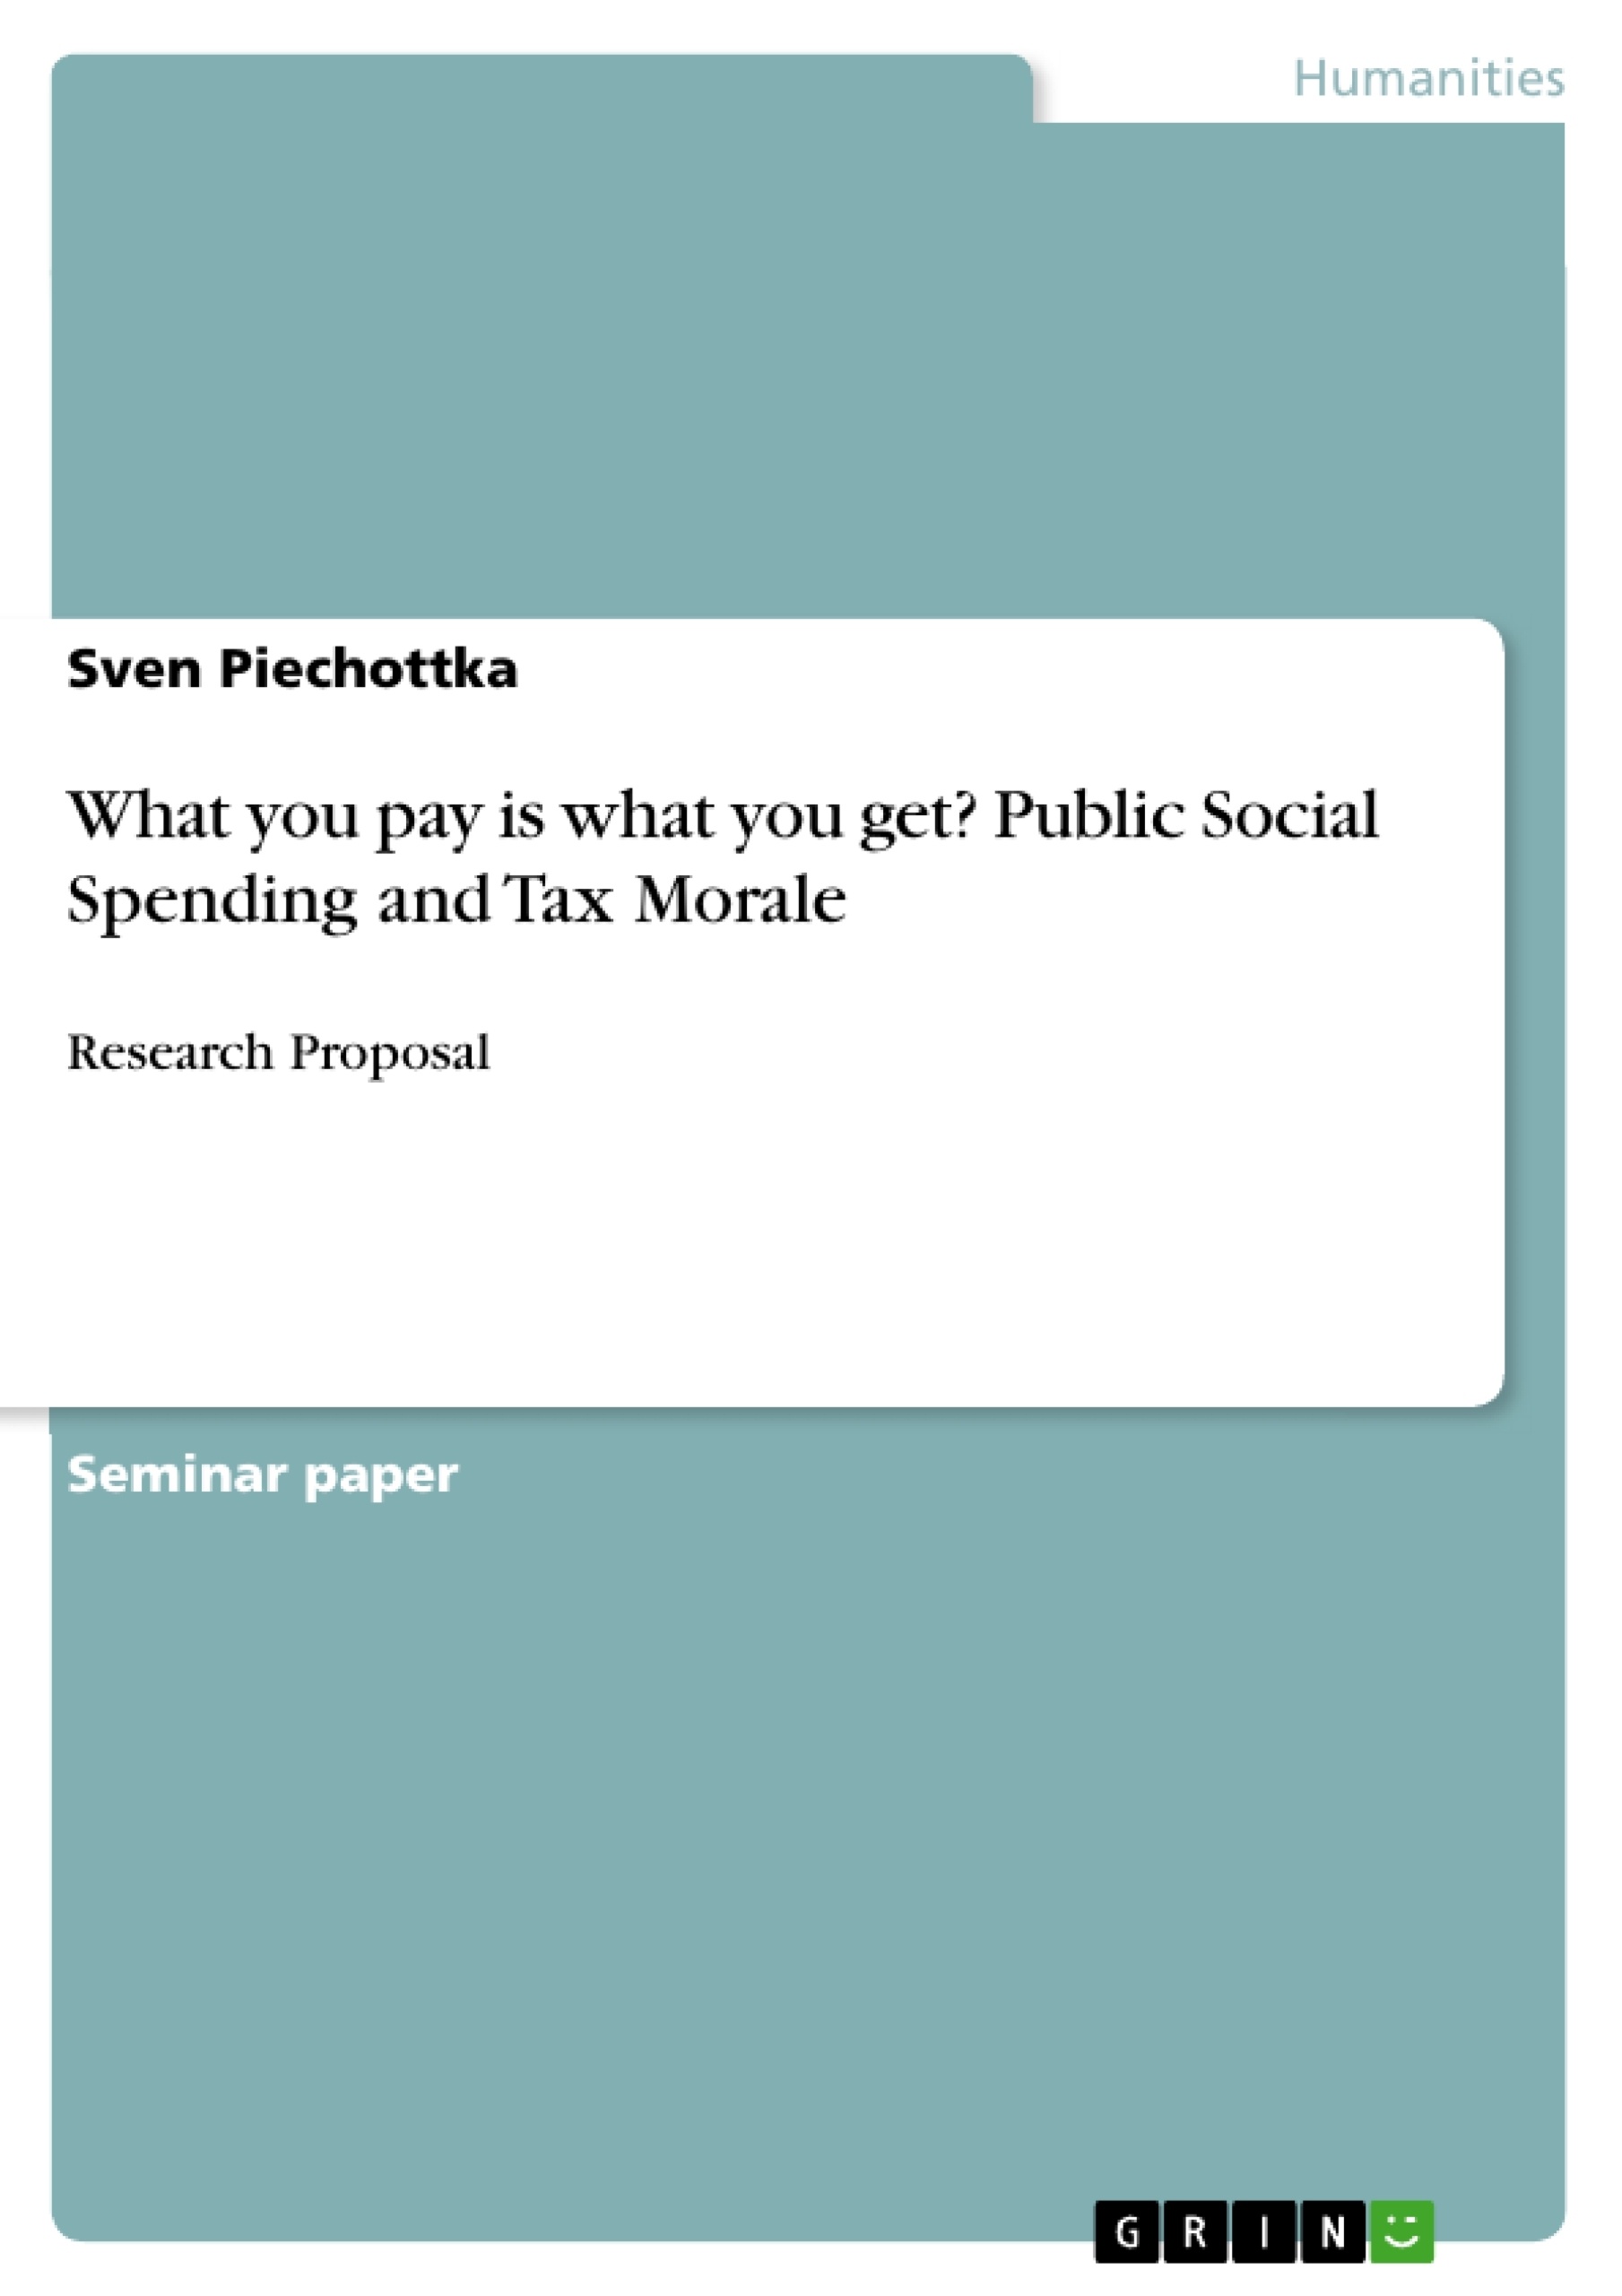 Titre: What you pay is what you get? Public Social Spending and Tax Morale